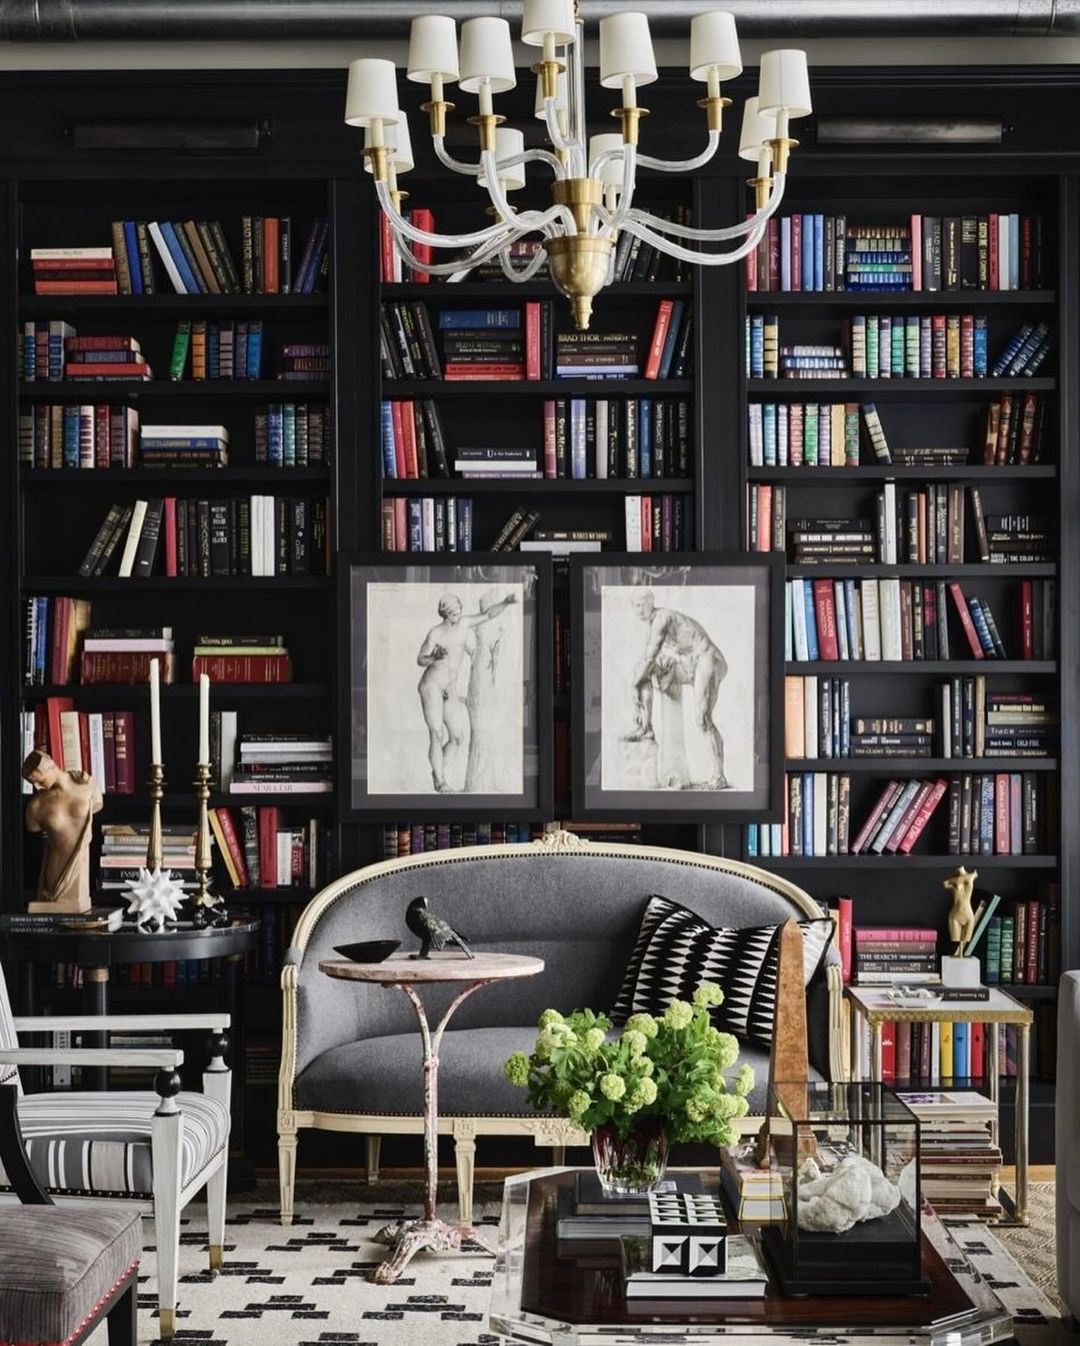 Monochrome Elegance with a Literary Flair